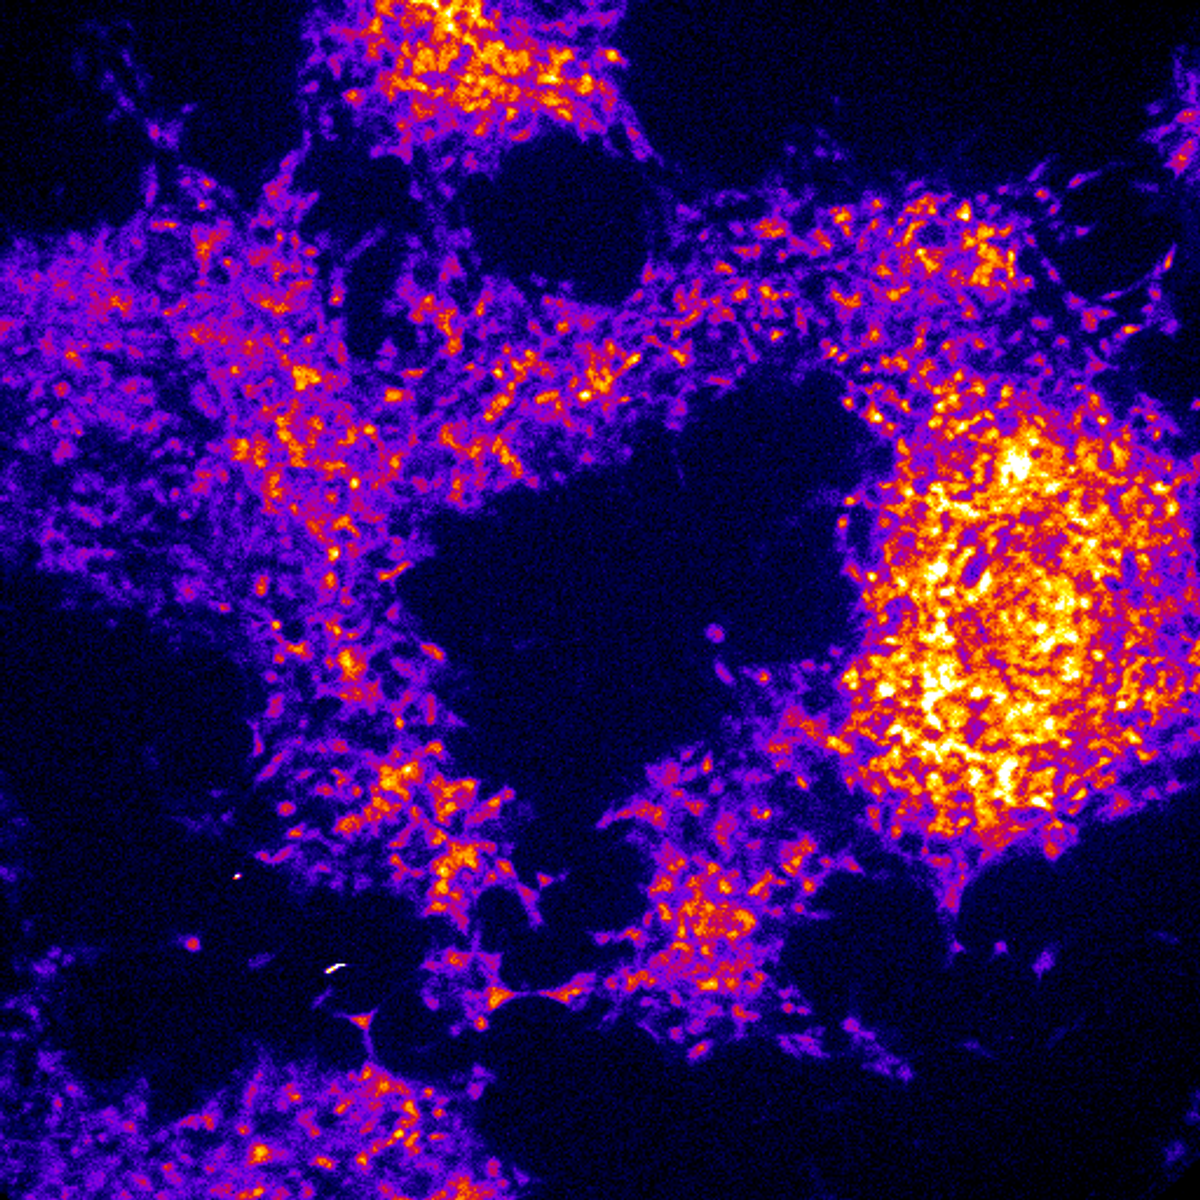 This is an image of a bioluminescent from gene expression reporter in stem cells from a rhinoceros.